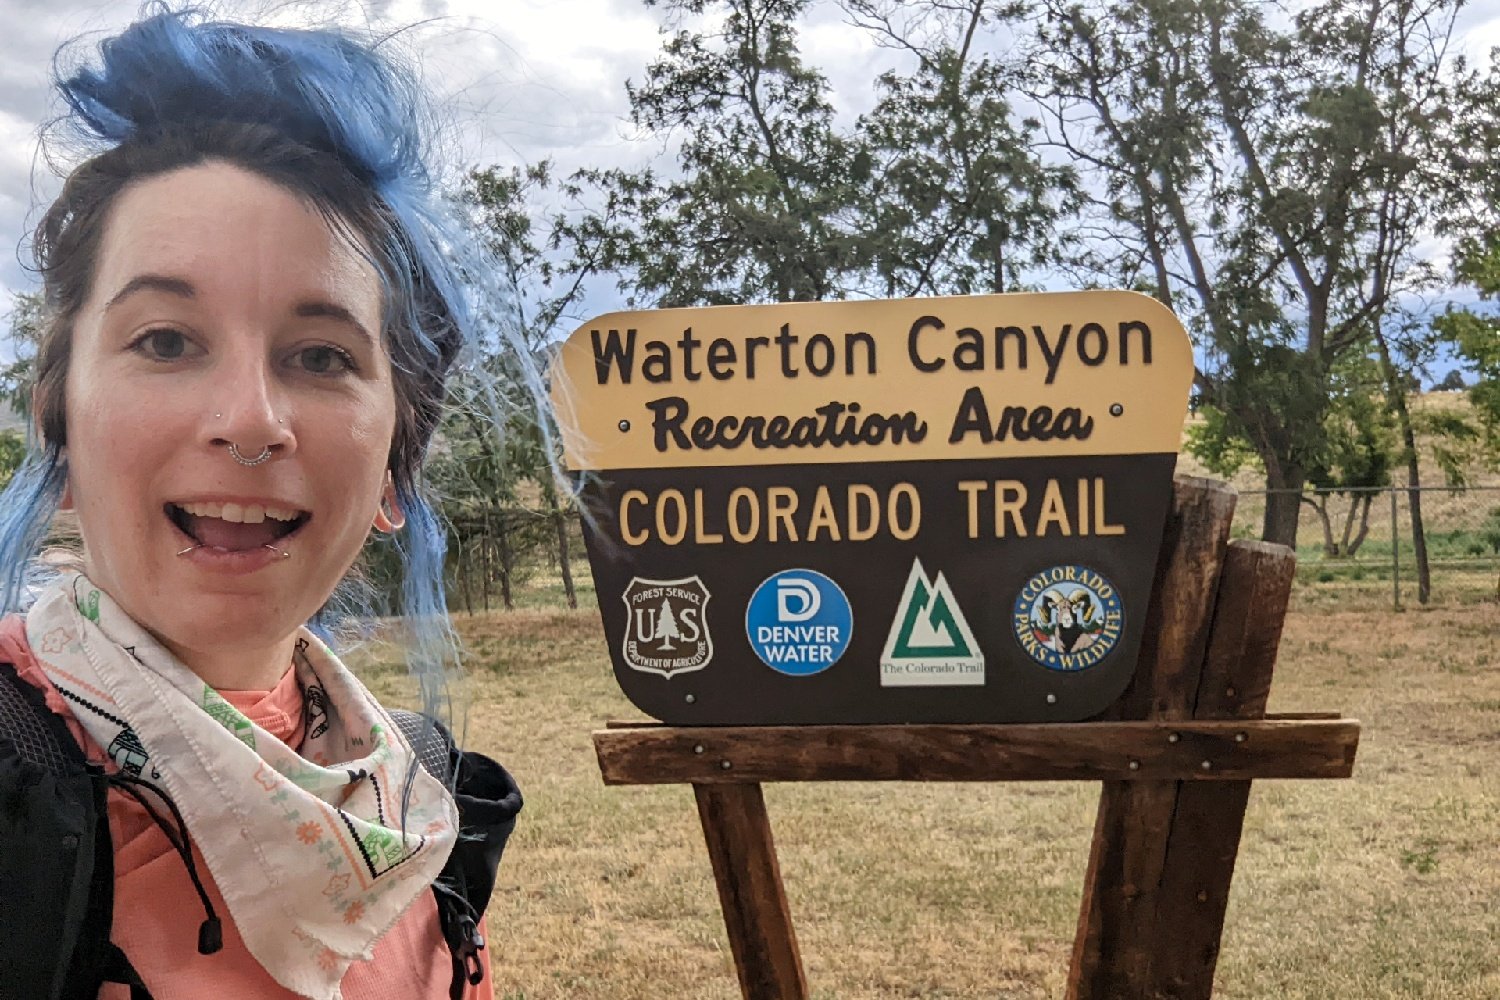 A selfie of a hiker at the Northern Terminus of the Colorado Trail in Waterton Canyon